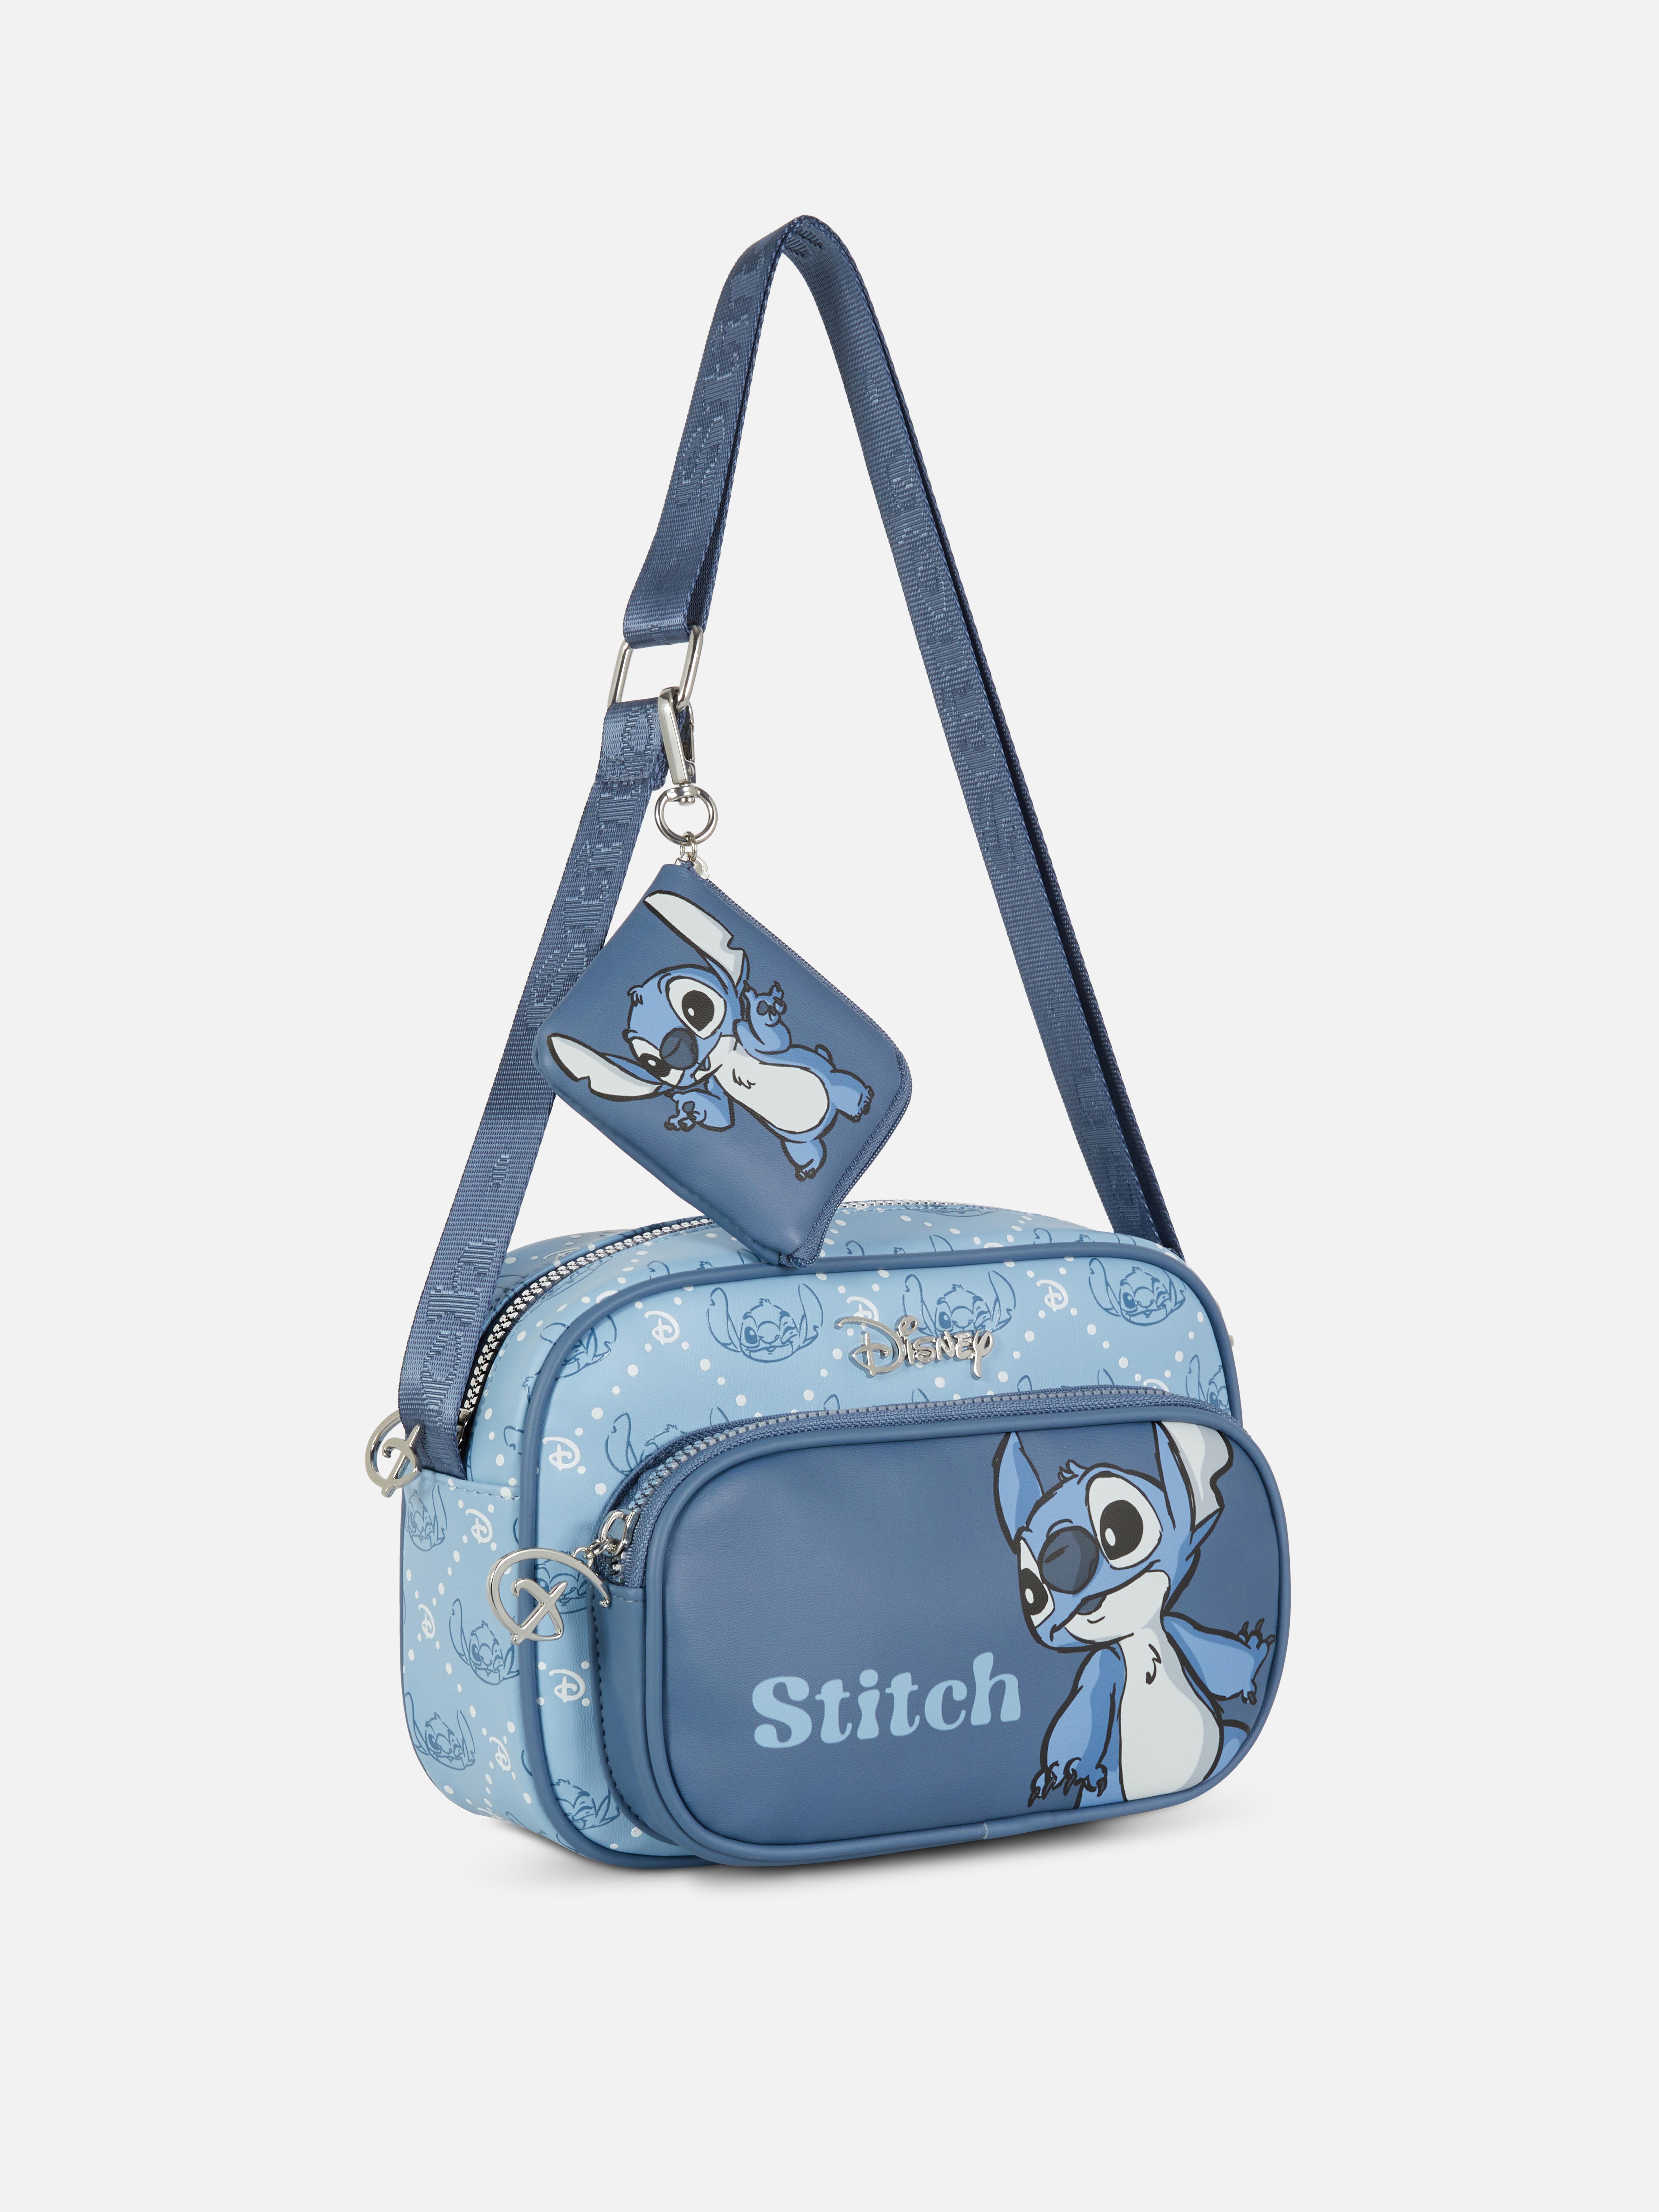 Primark - Aloha new Disney's Stitch bags 👋 💙 Prices from £4